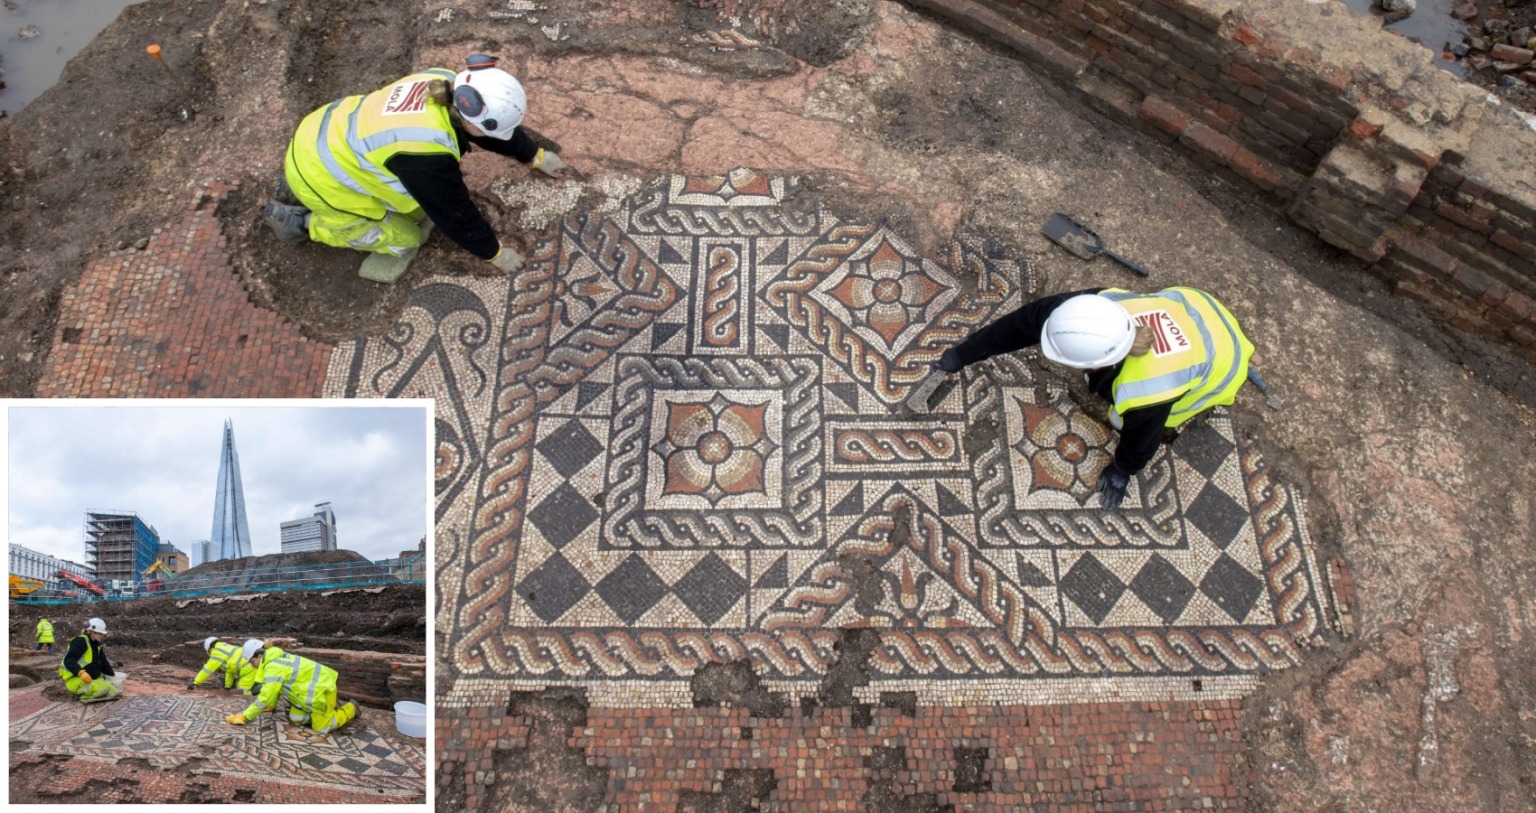 Digging in the Shadows of London’s Shard, Archaeologists Discovered a ‘Once-in-a-Lifetime Find’: a Shockingly Intact Roman Mosaic